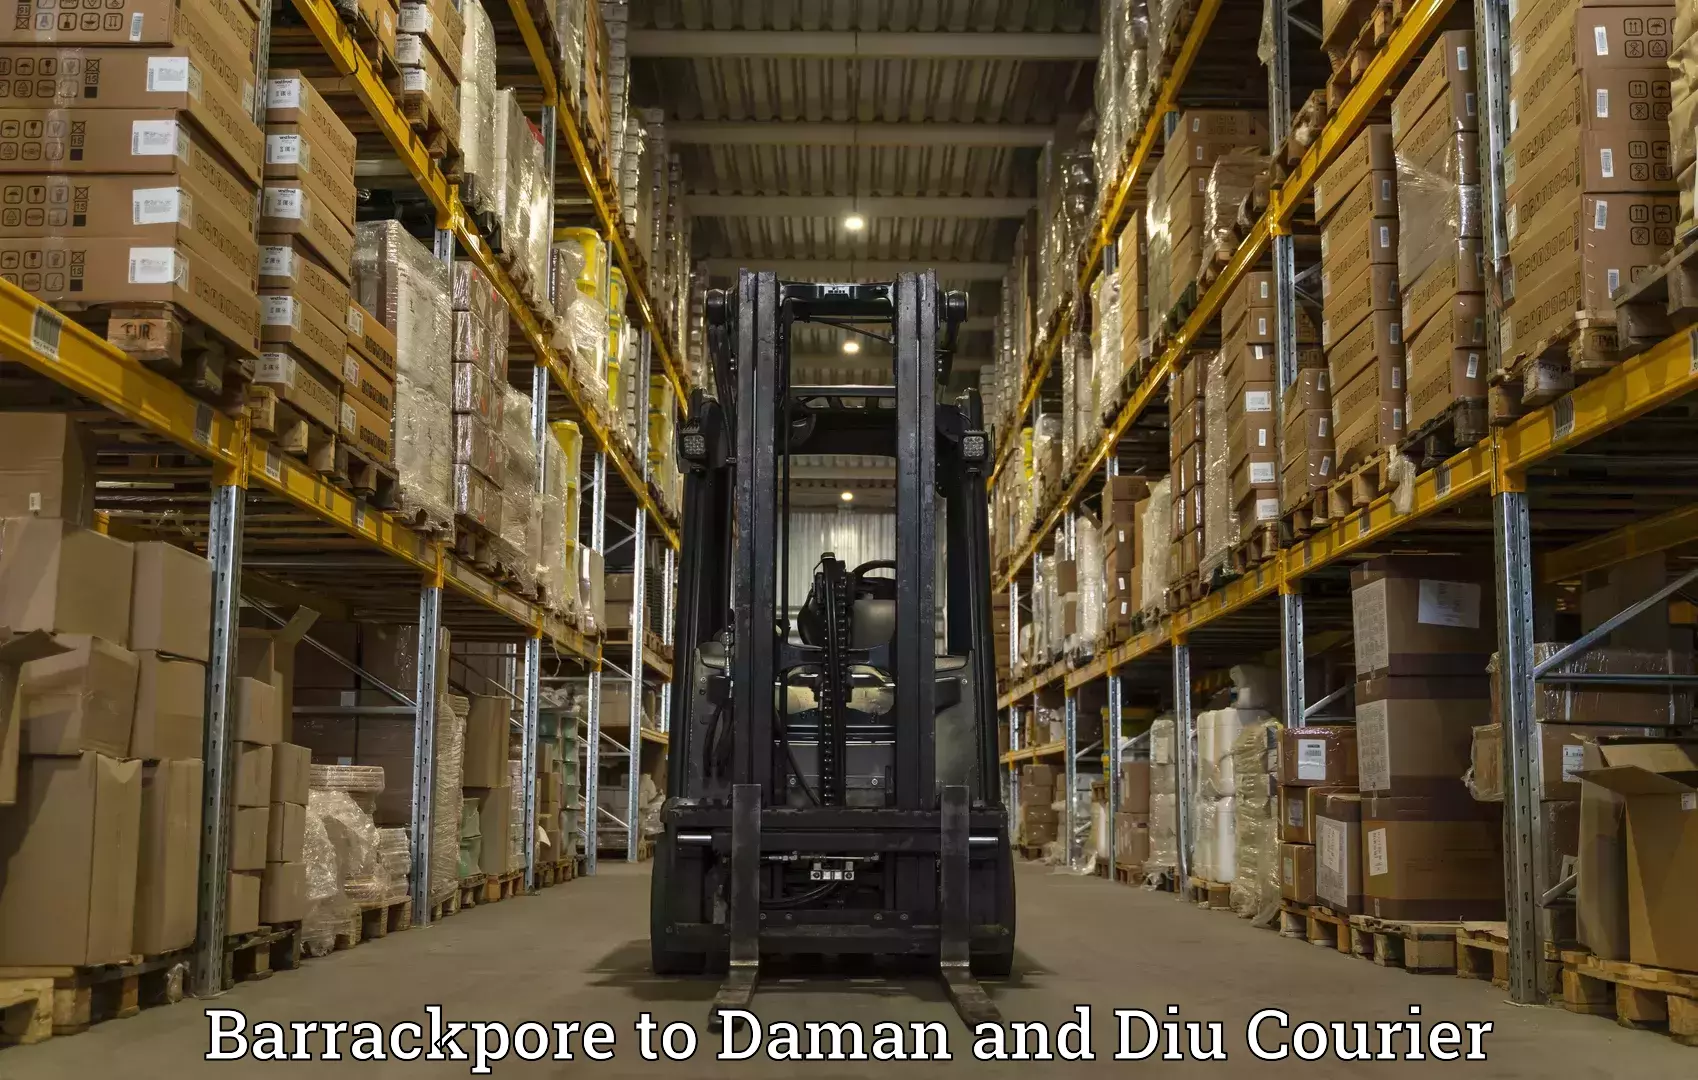 Efficient order fulfillment in Barrackpore to Diu